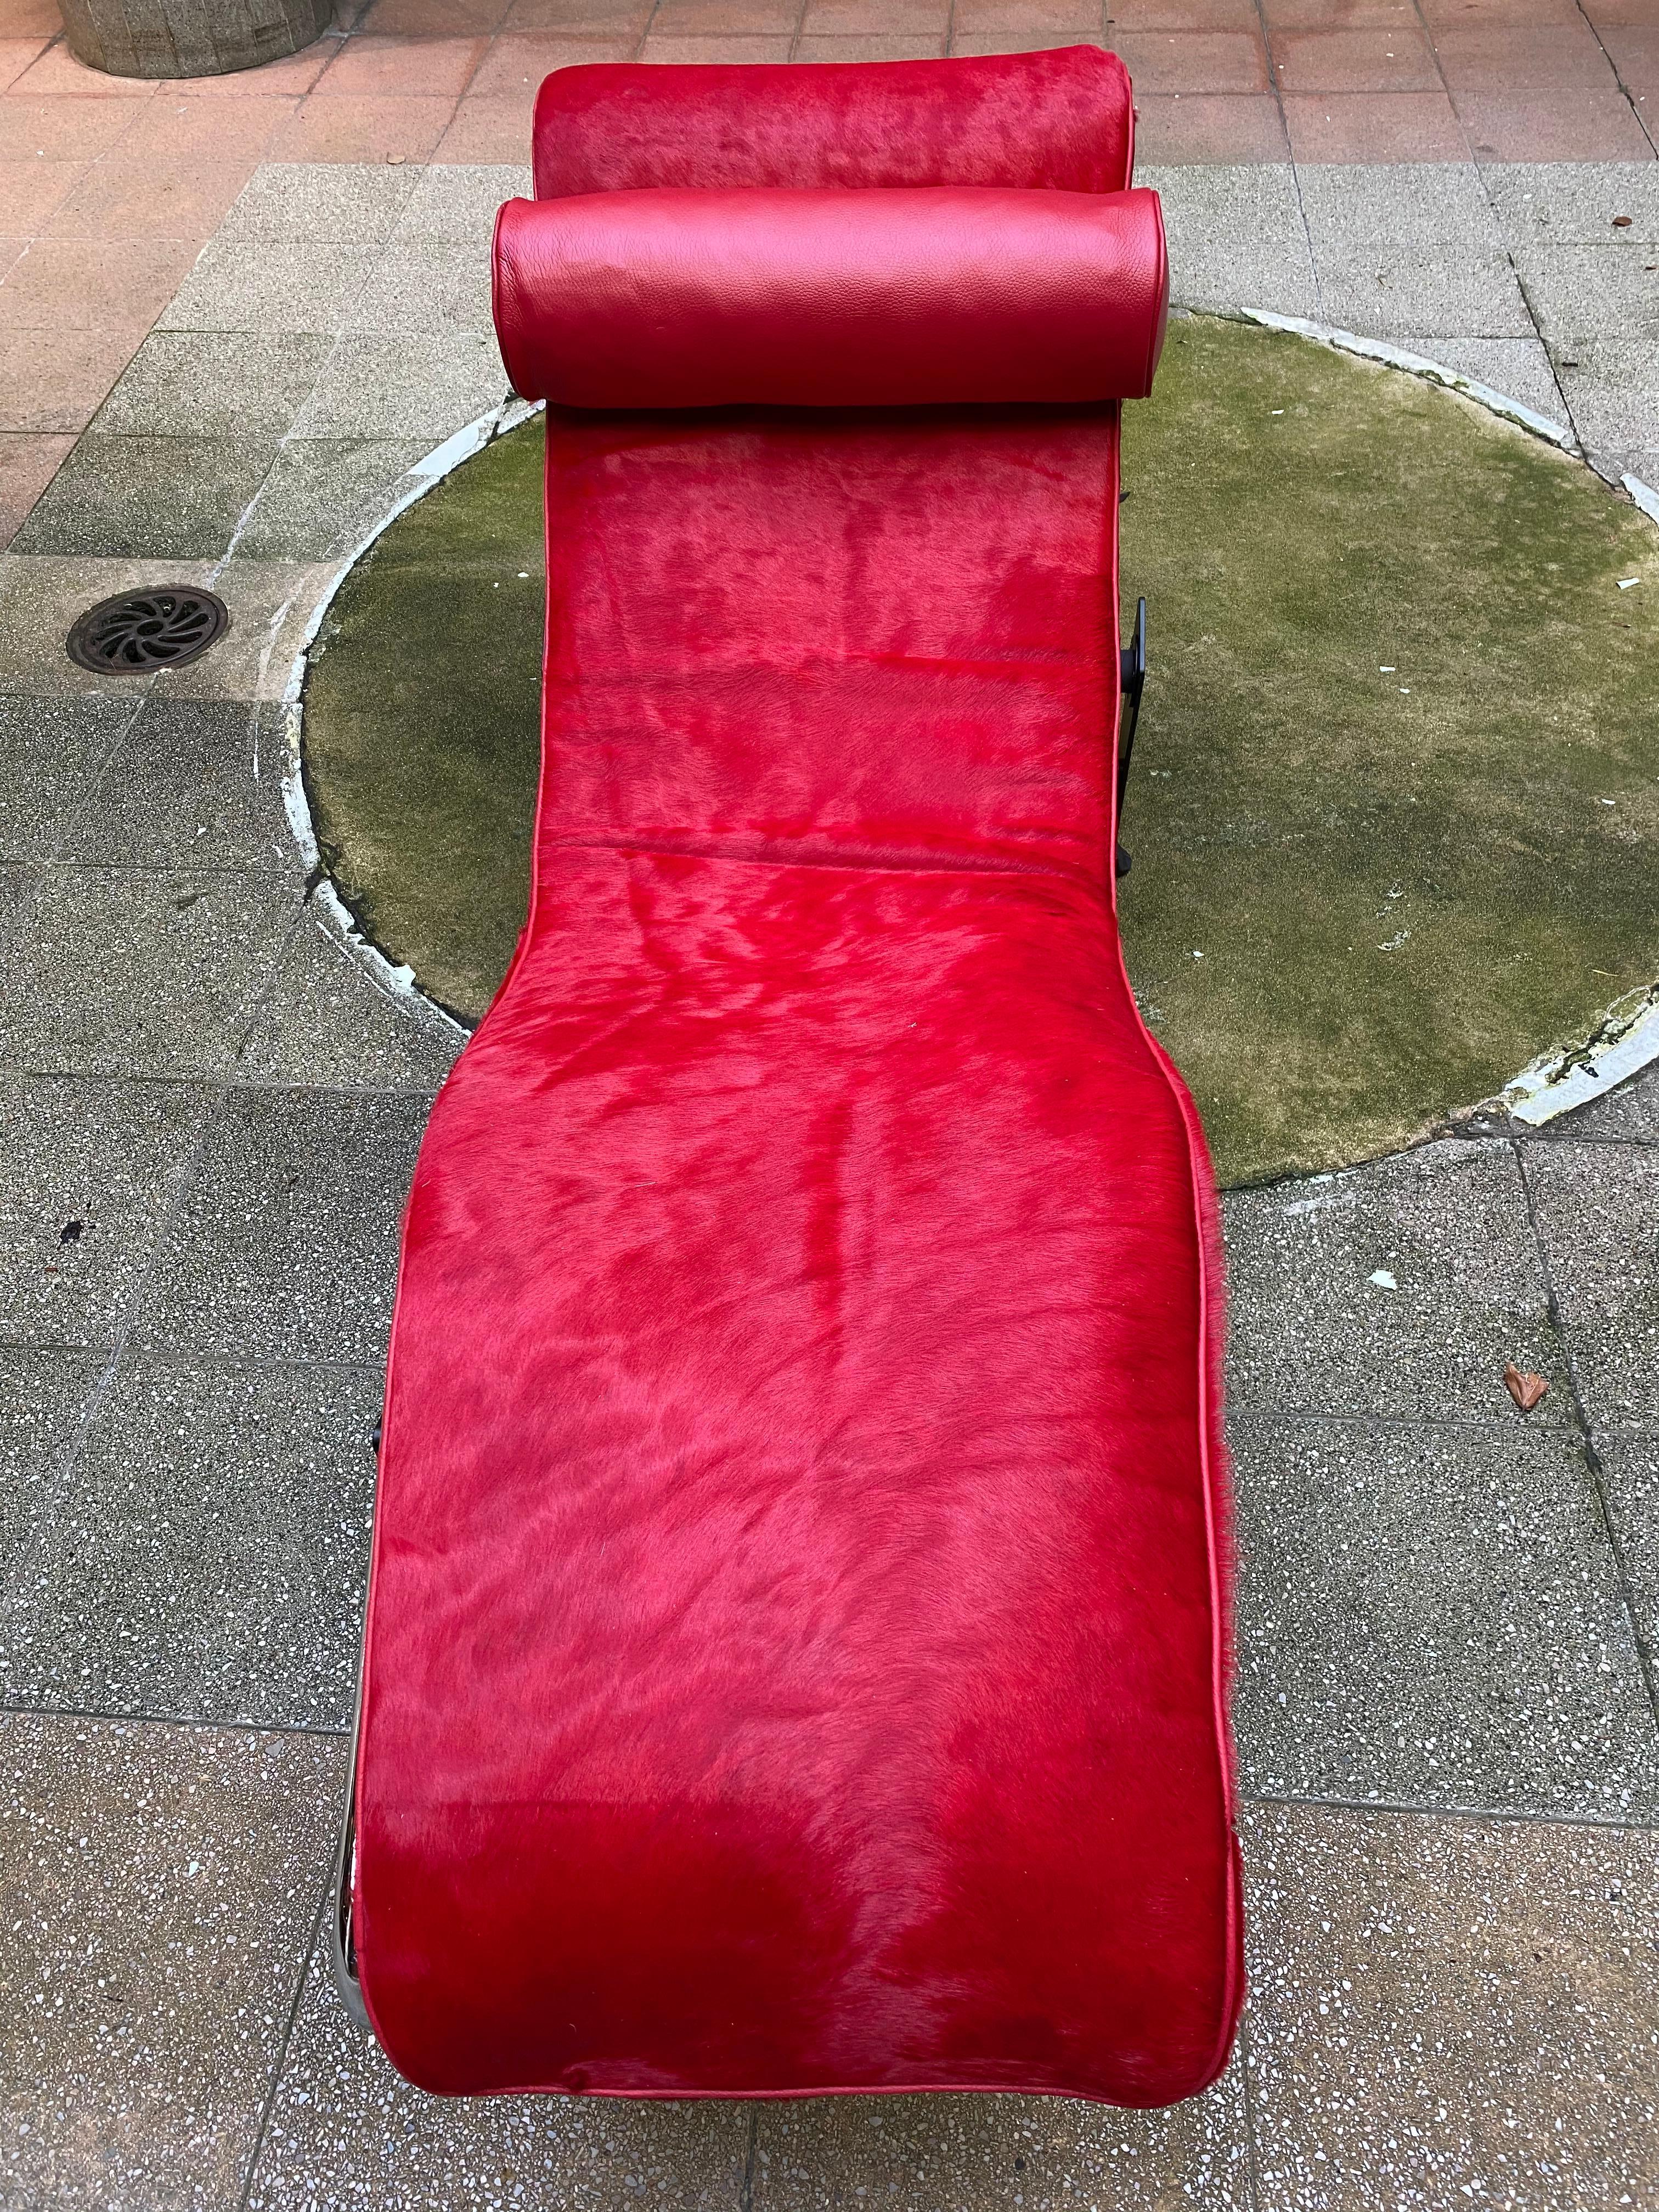 Le Corbusier/ Charlotte Perriand
LC4
Cassina Edition
Exceptional LC4 in red foal
Special order part,
circa 2015
Superb condition (except for a small snag)
Engraved and numbered
Certificate
3400 Euros.